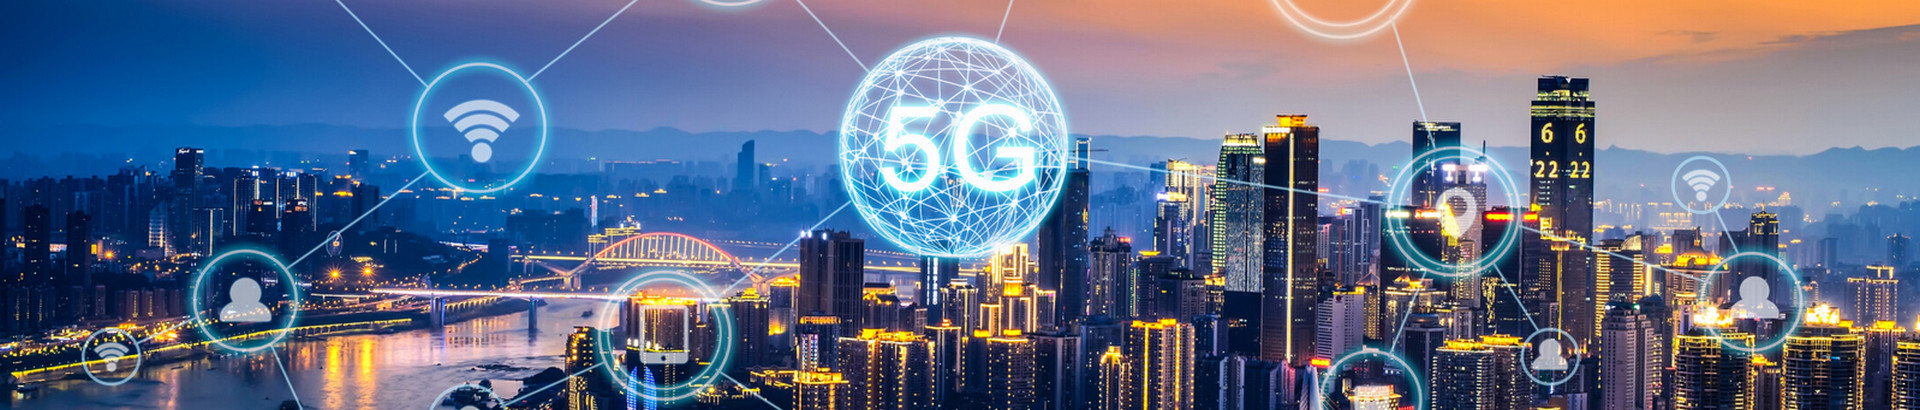 From 5G to 6G, Three Key Technologies Become the Trend